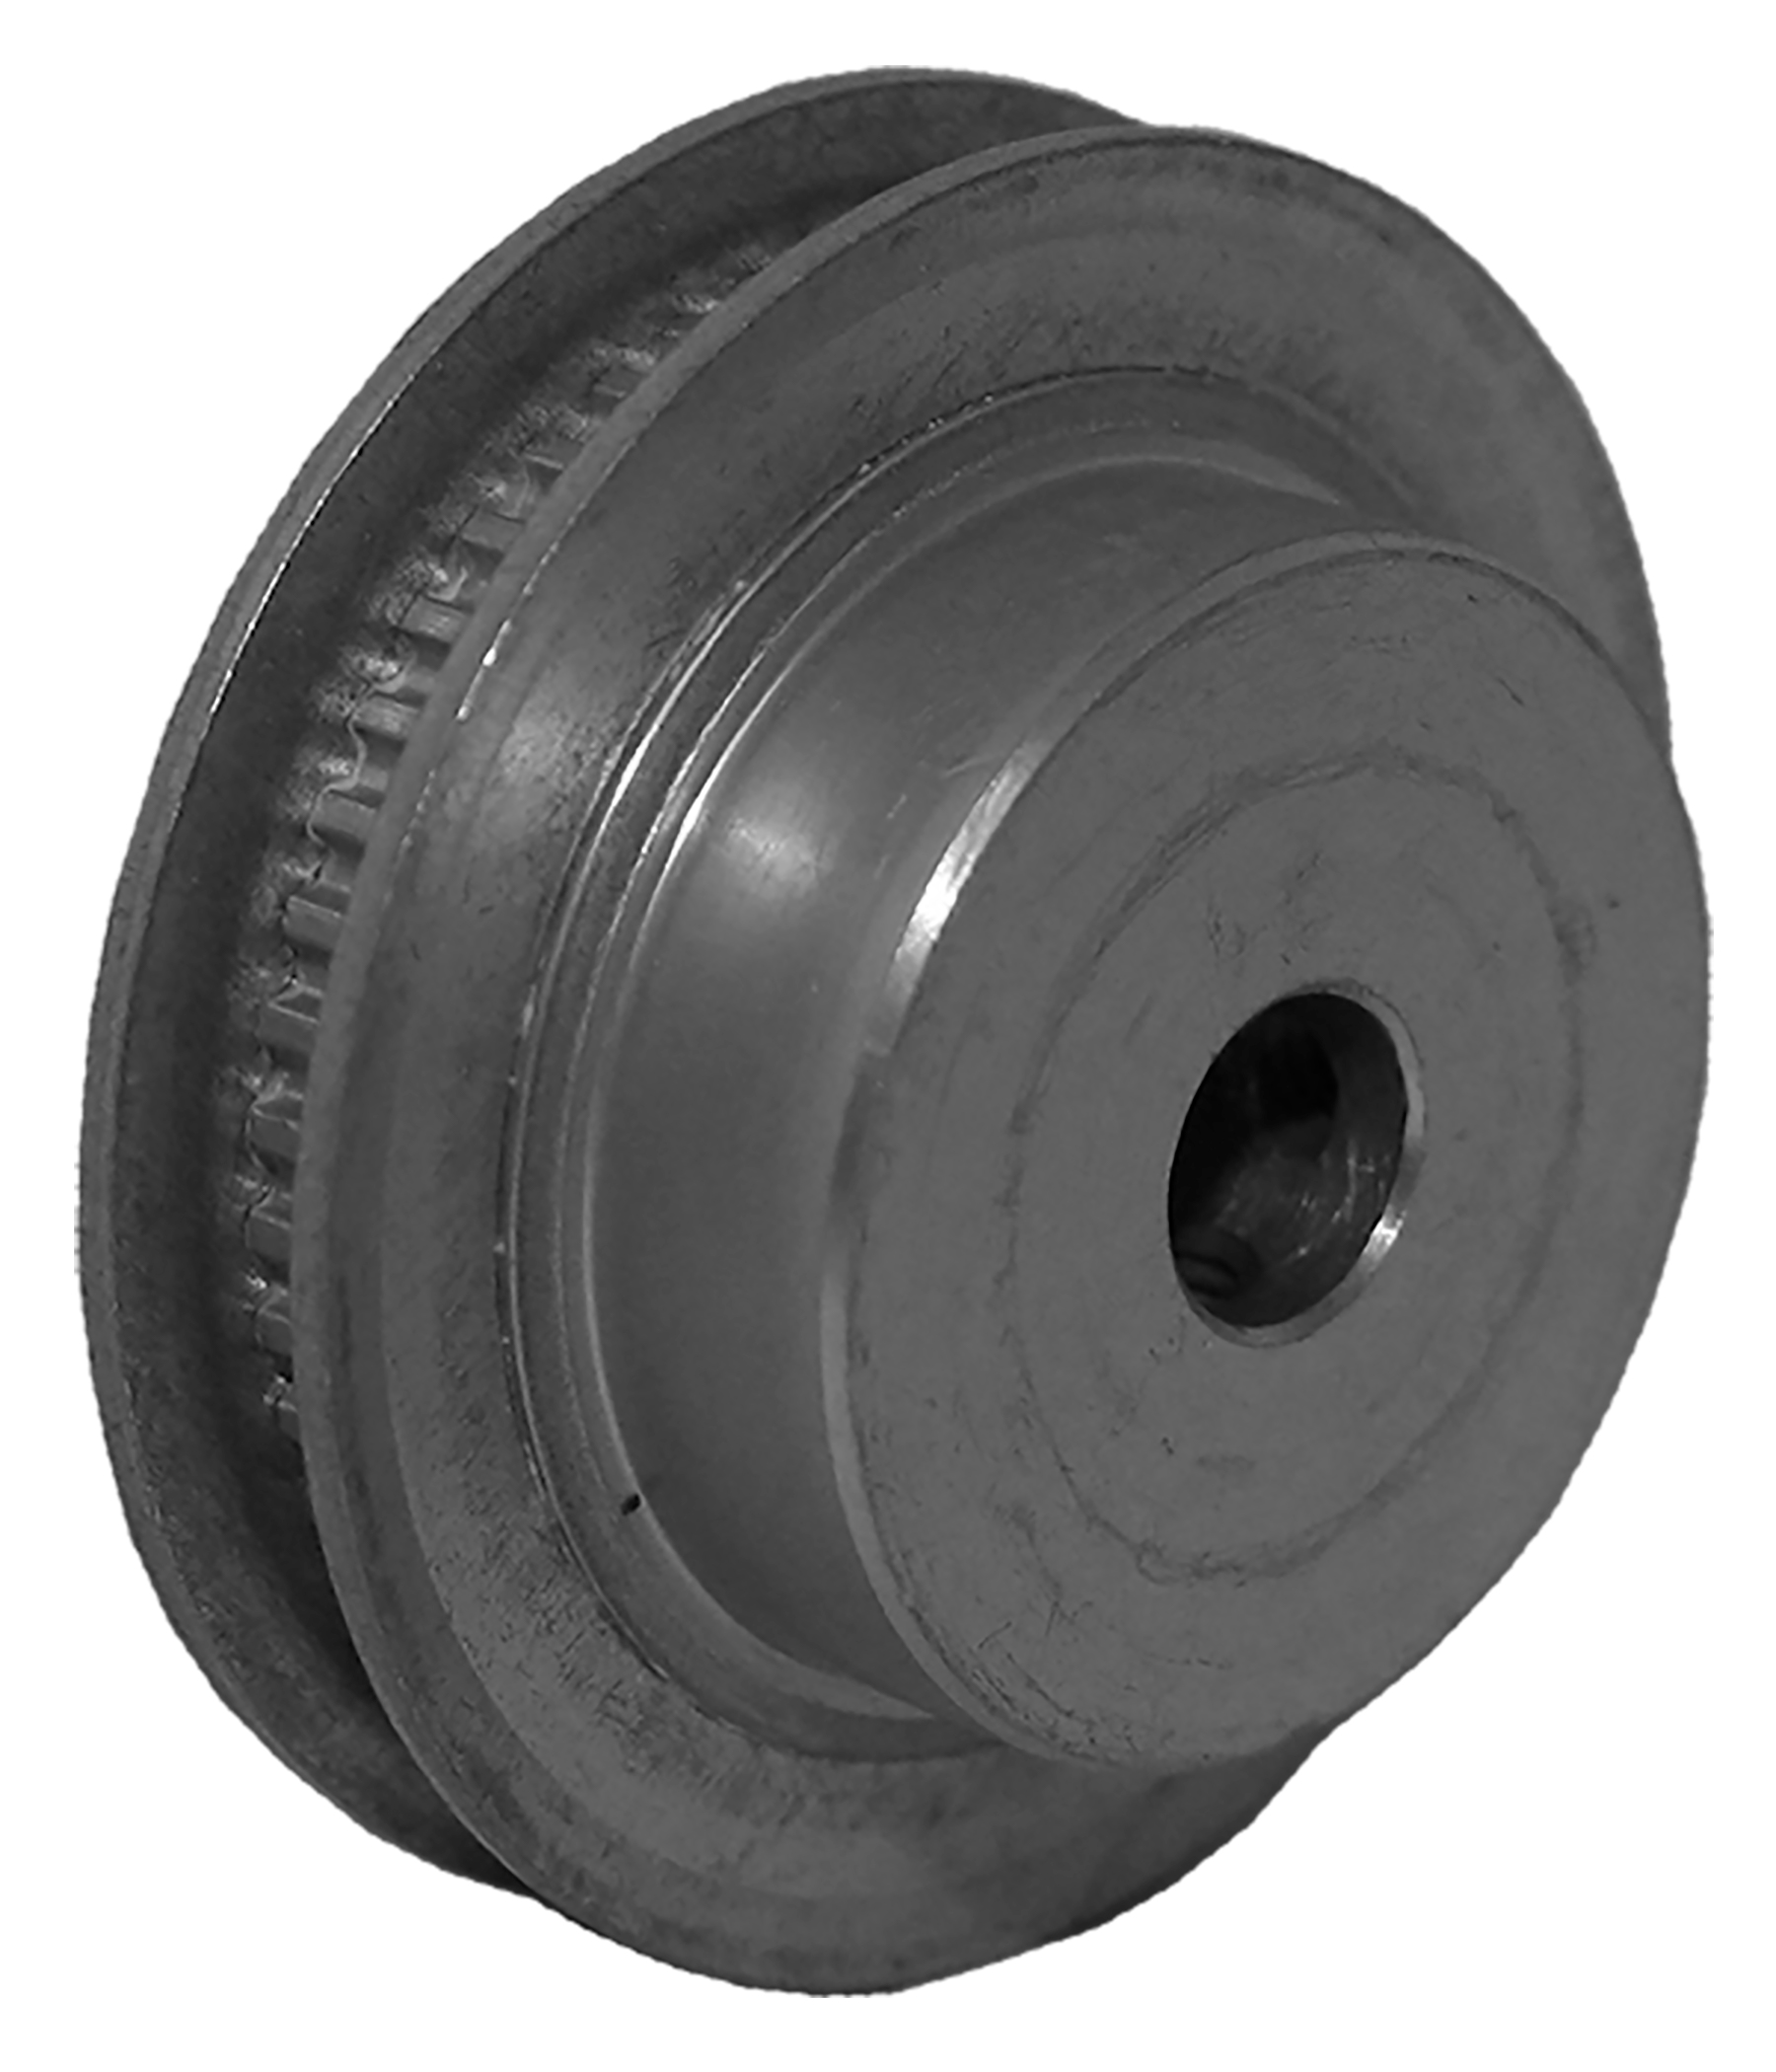 48MP012-6FA3 - Aluminum Imperial Pitch Pulleys